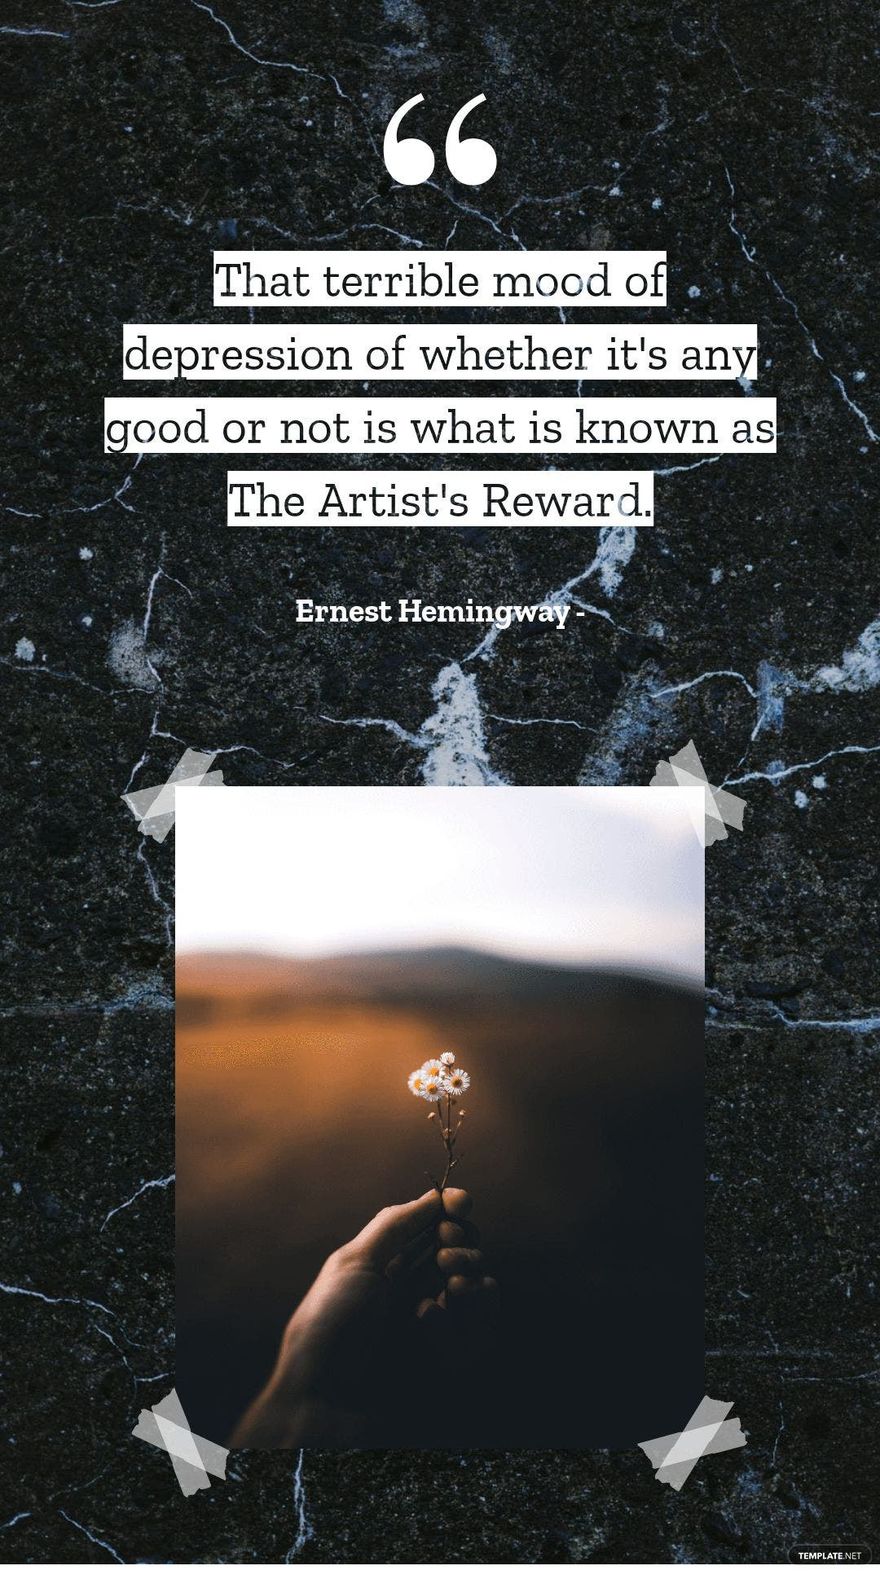 Ernest Hemingway - That terrible mood of depression of whether it's any good or not is what is known as The Artist's Reward. Template